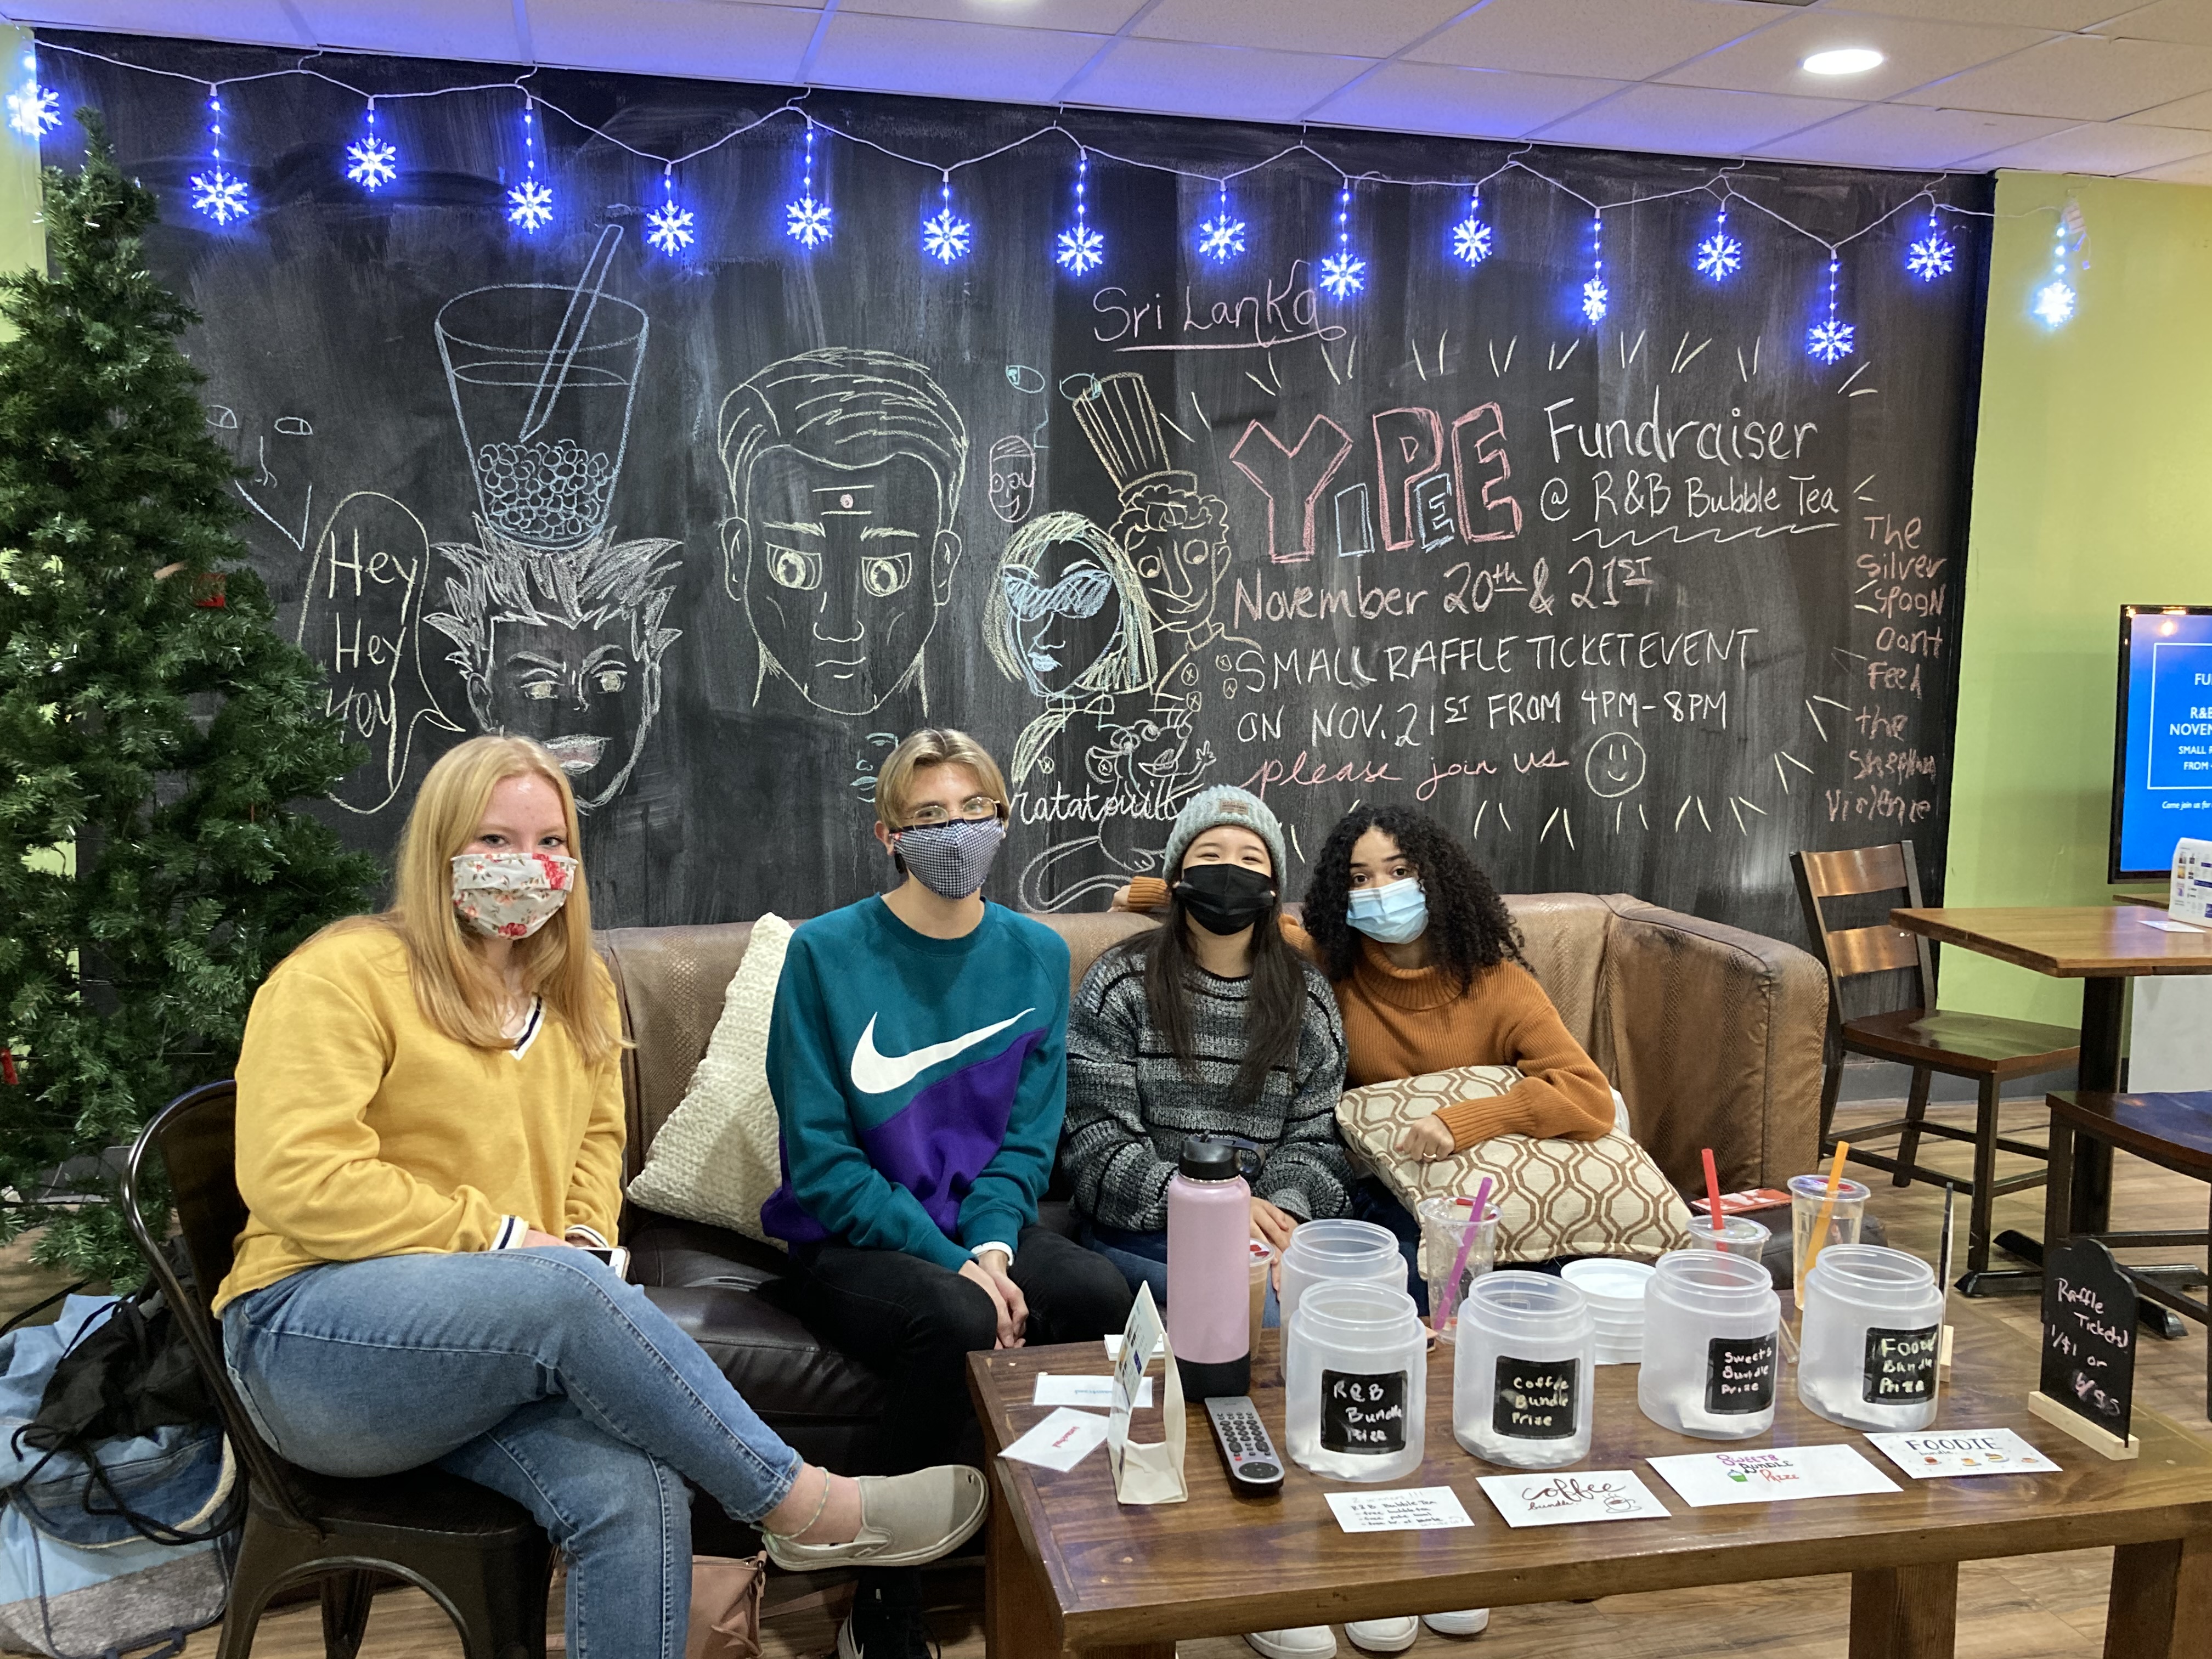 Students in face masks smile at the camera during a bubble tea fundraiser